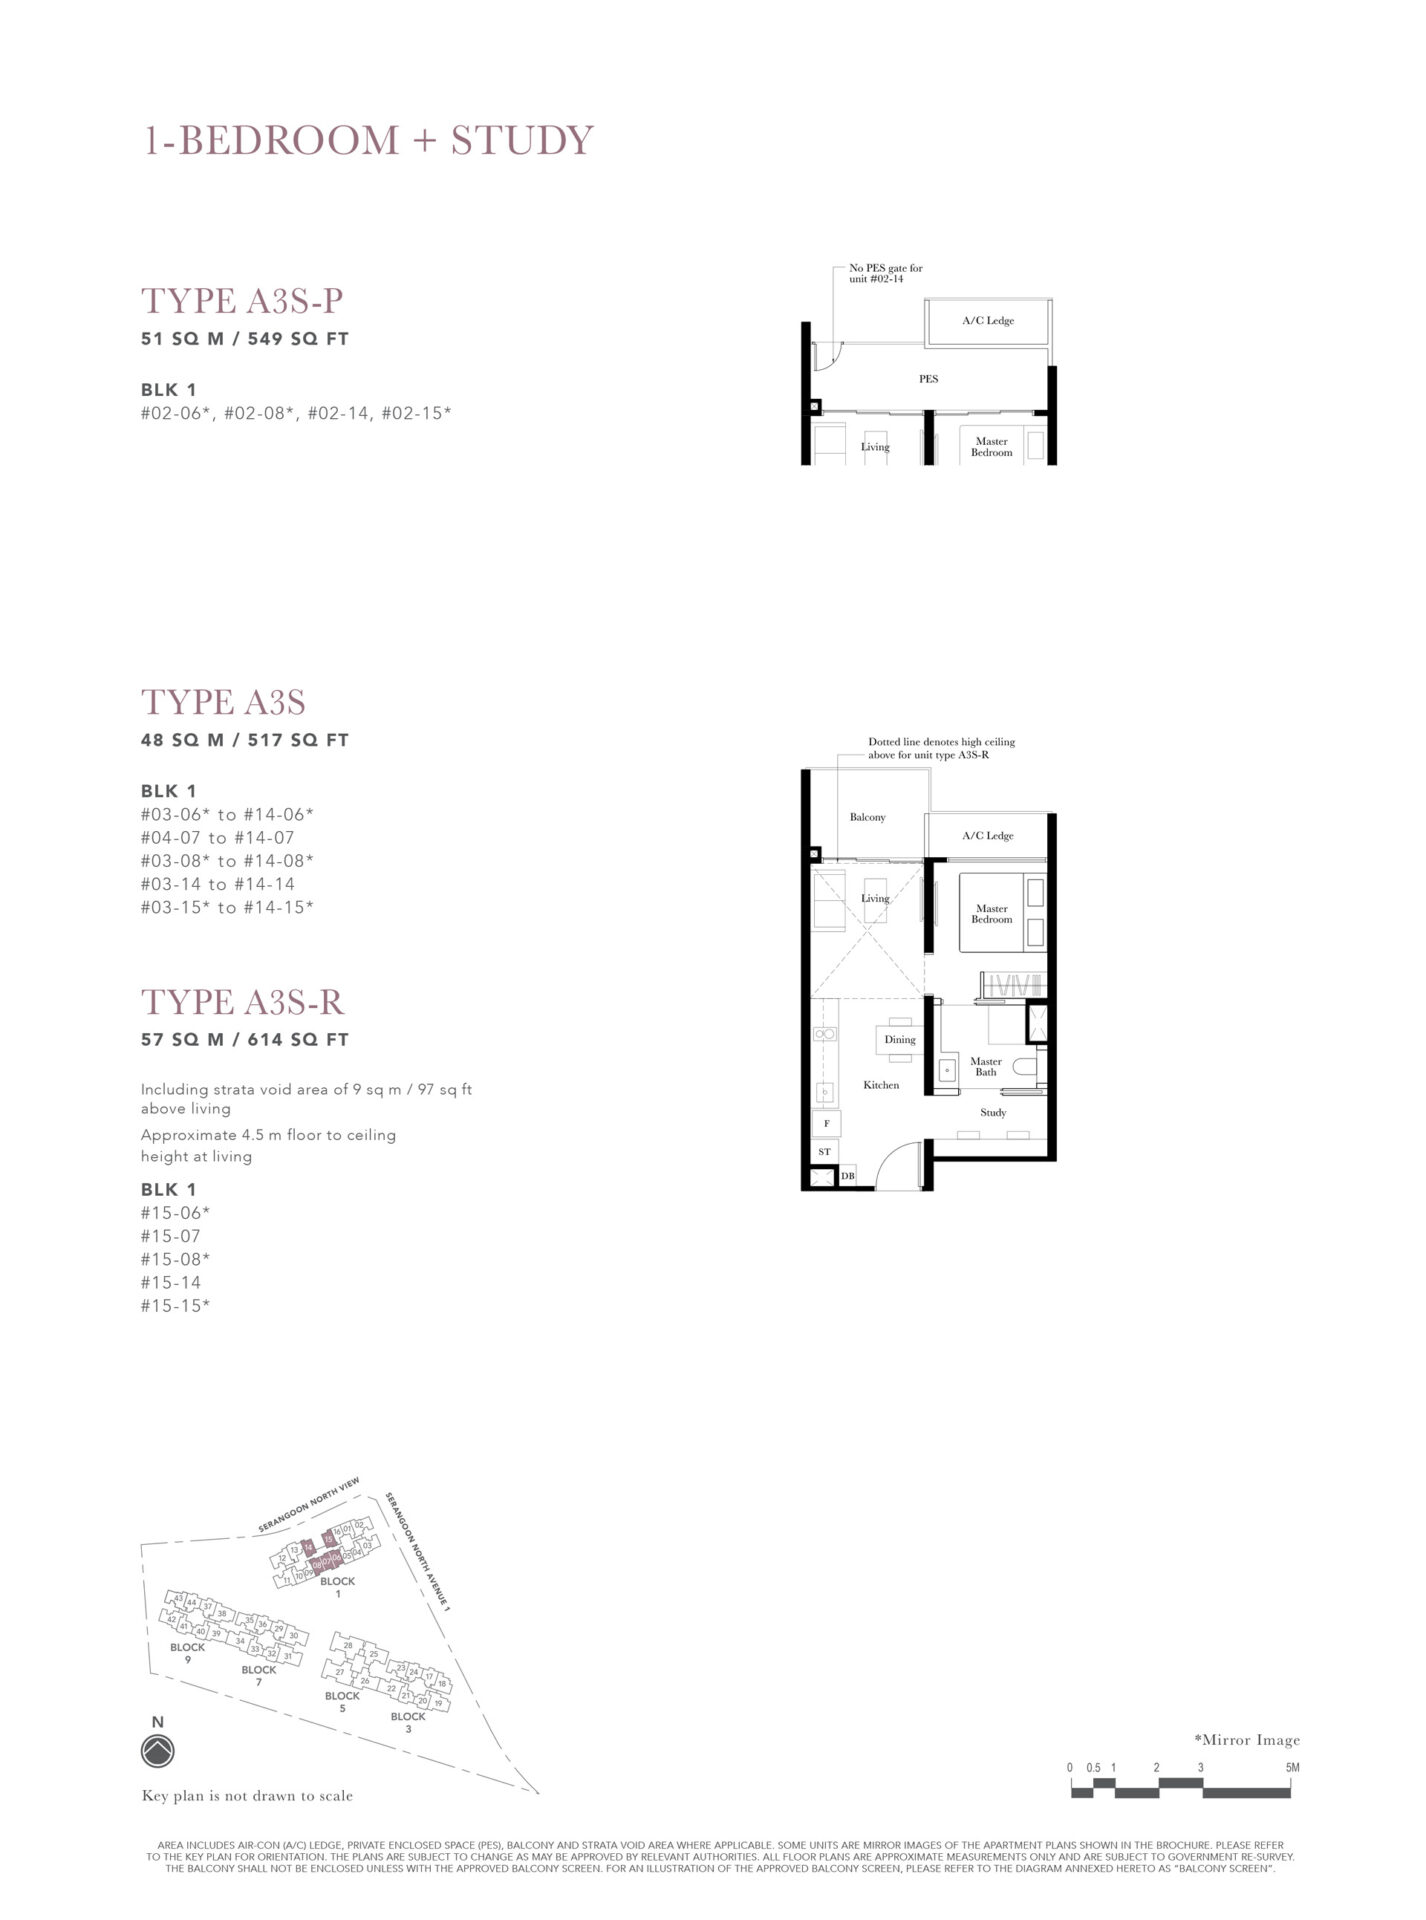 The-Garden-Residences-1-Bedroom-Study-Type-A3S-517sf